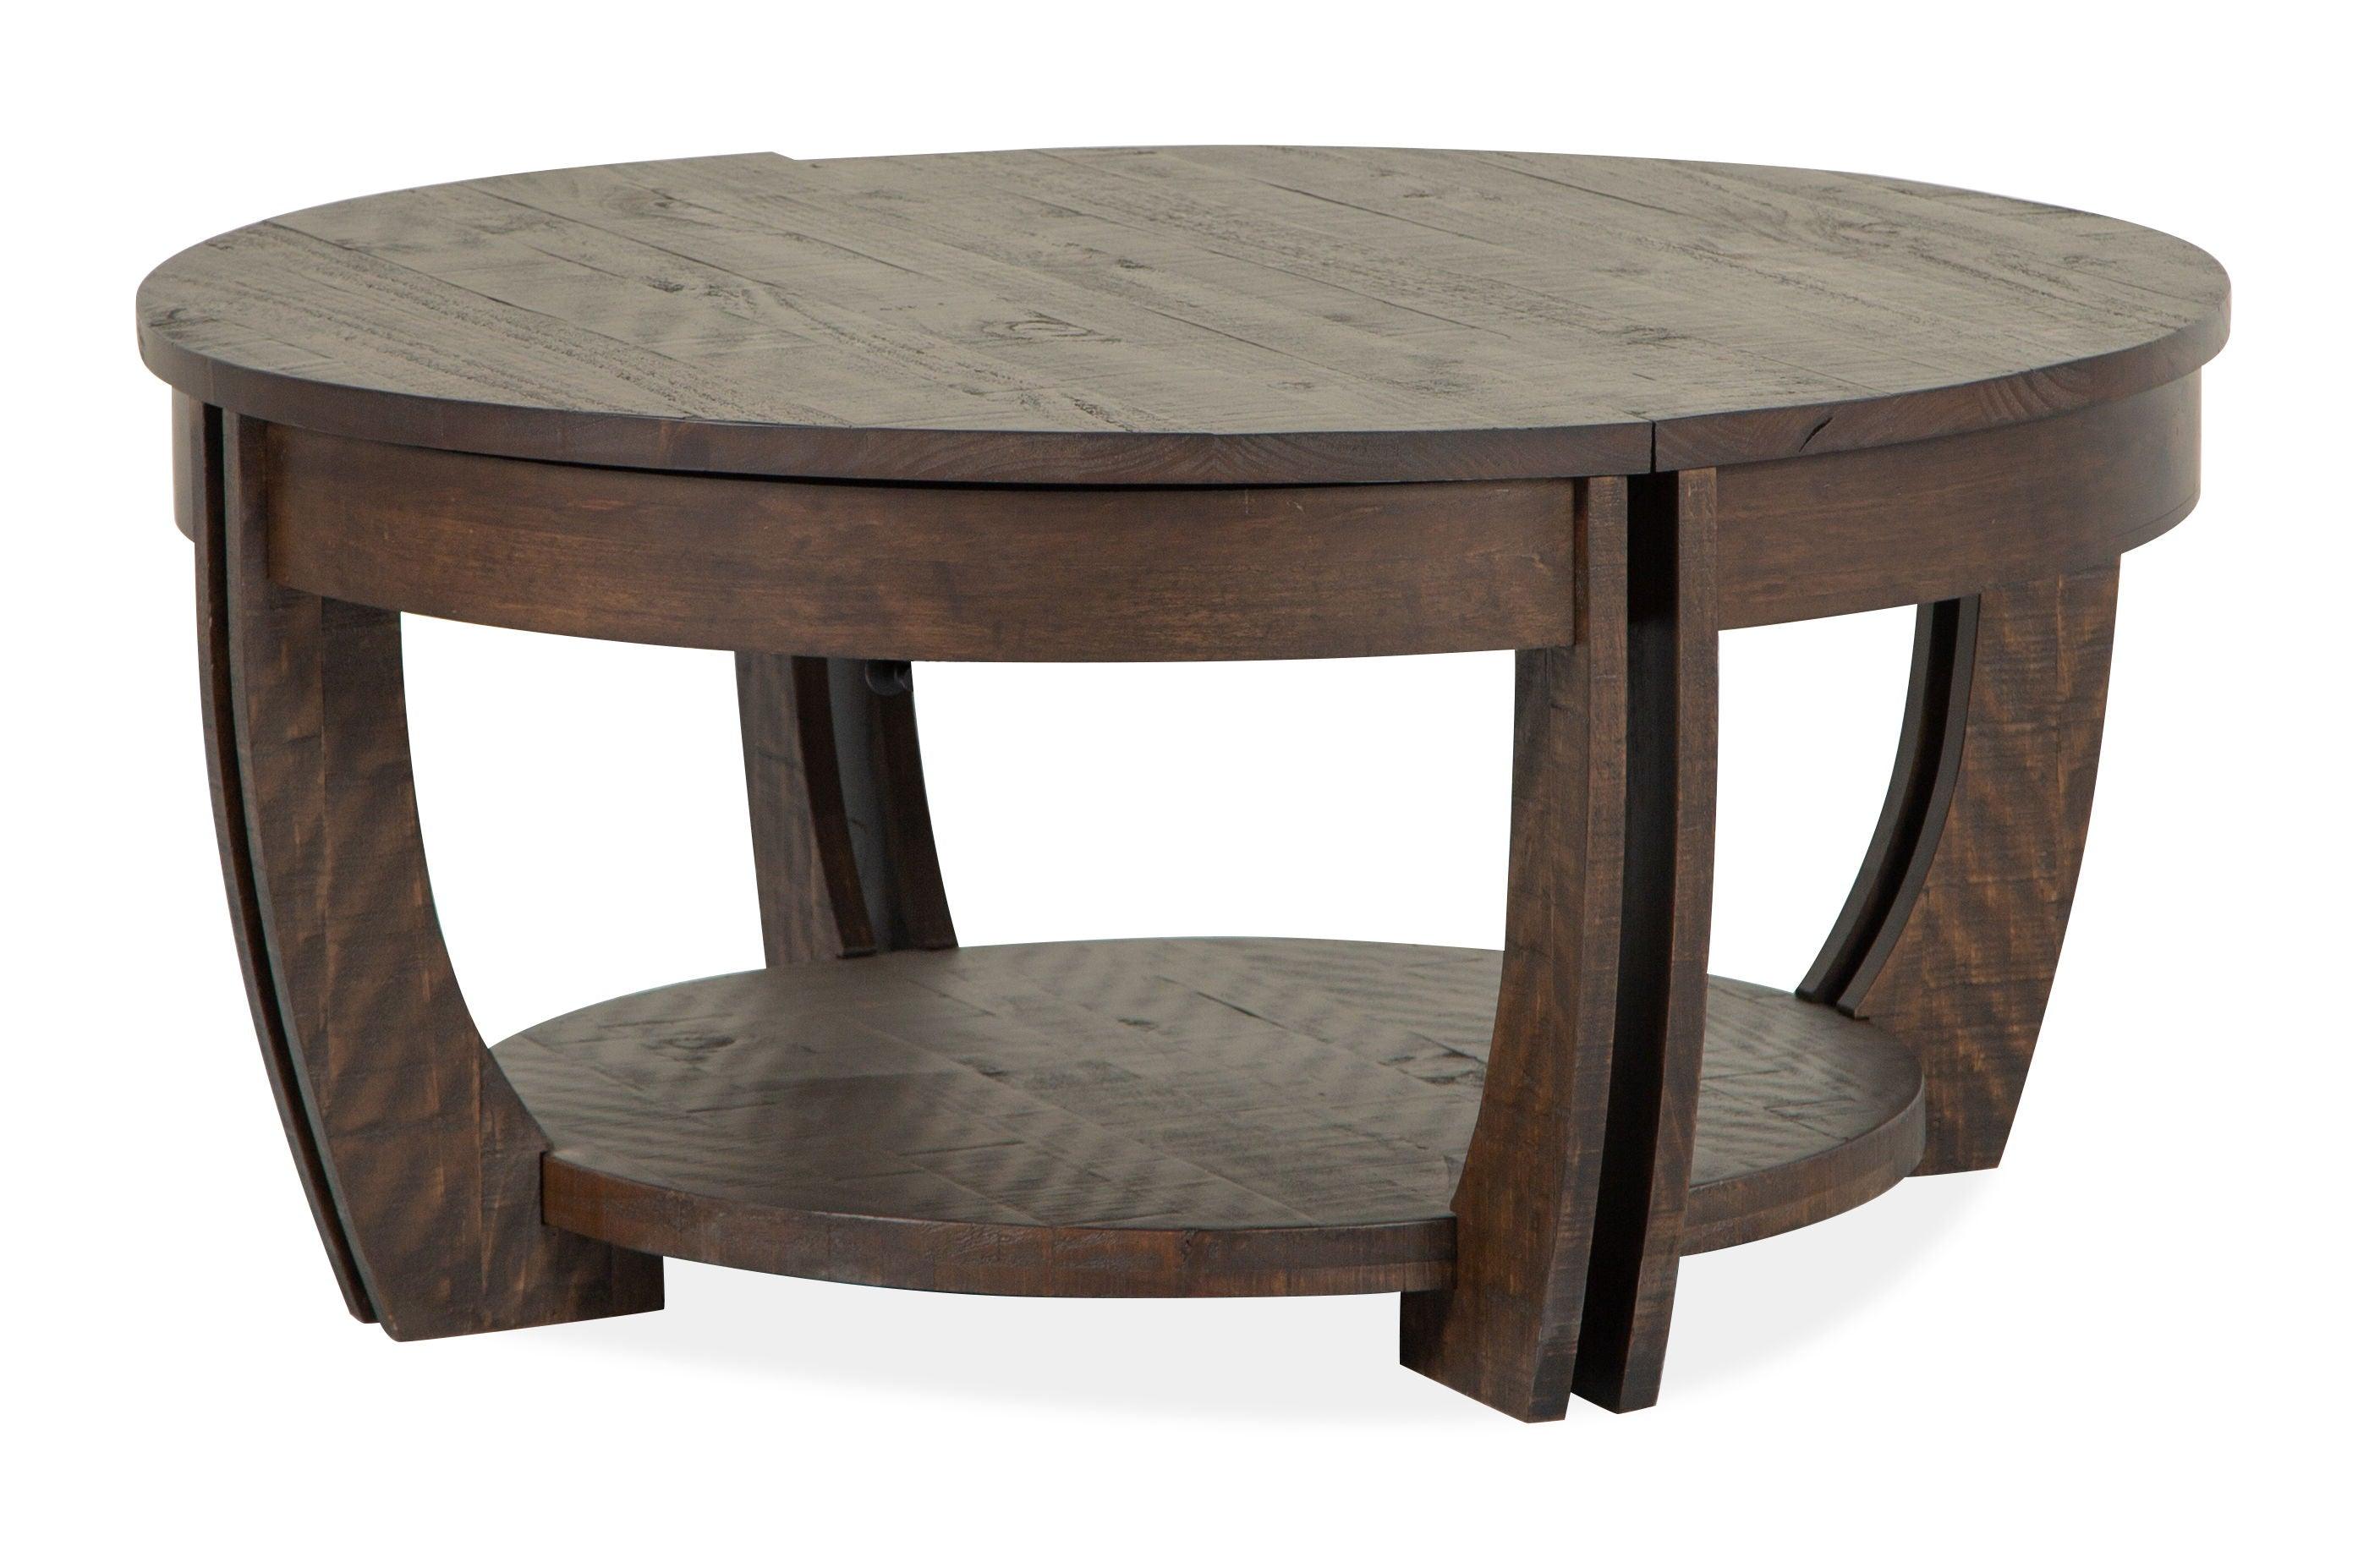 Magnussen Furniture - Lyndale - Lift Top Storage Cocktail Table With Casters - Nutmeg - 5th Avenue Furniture